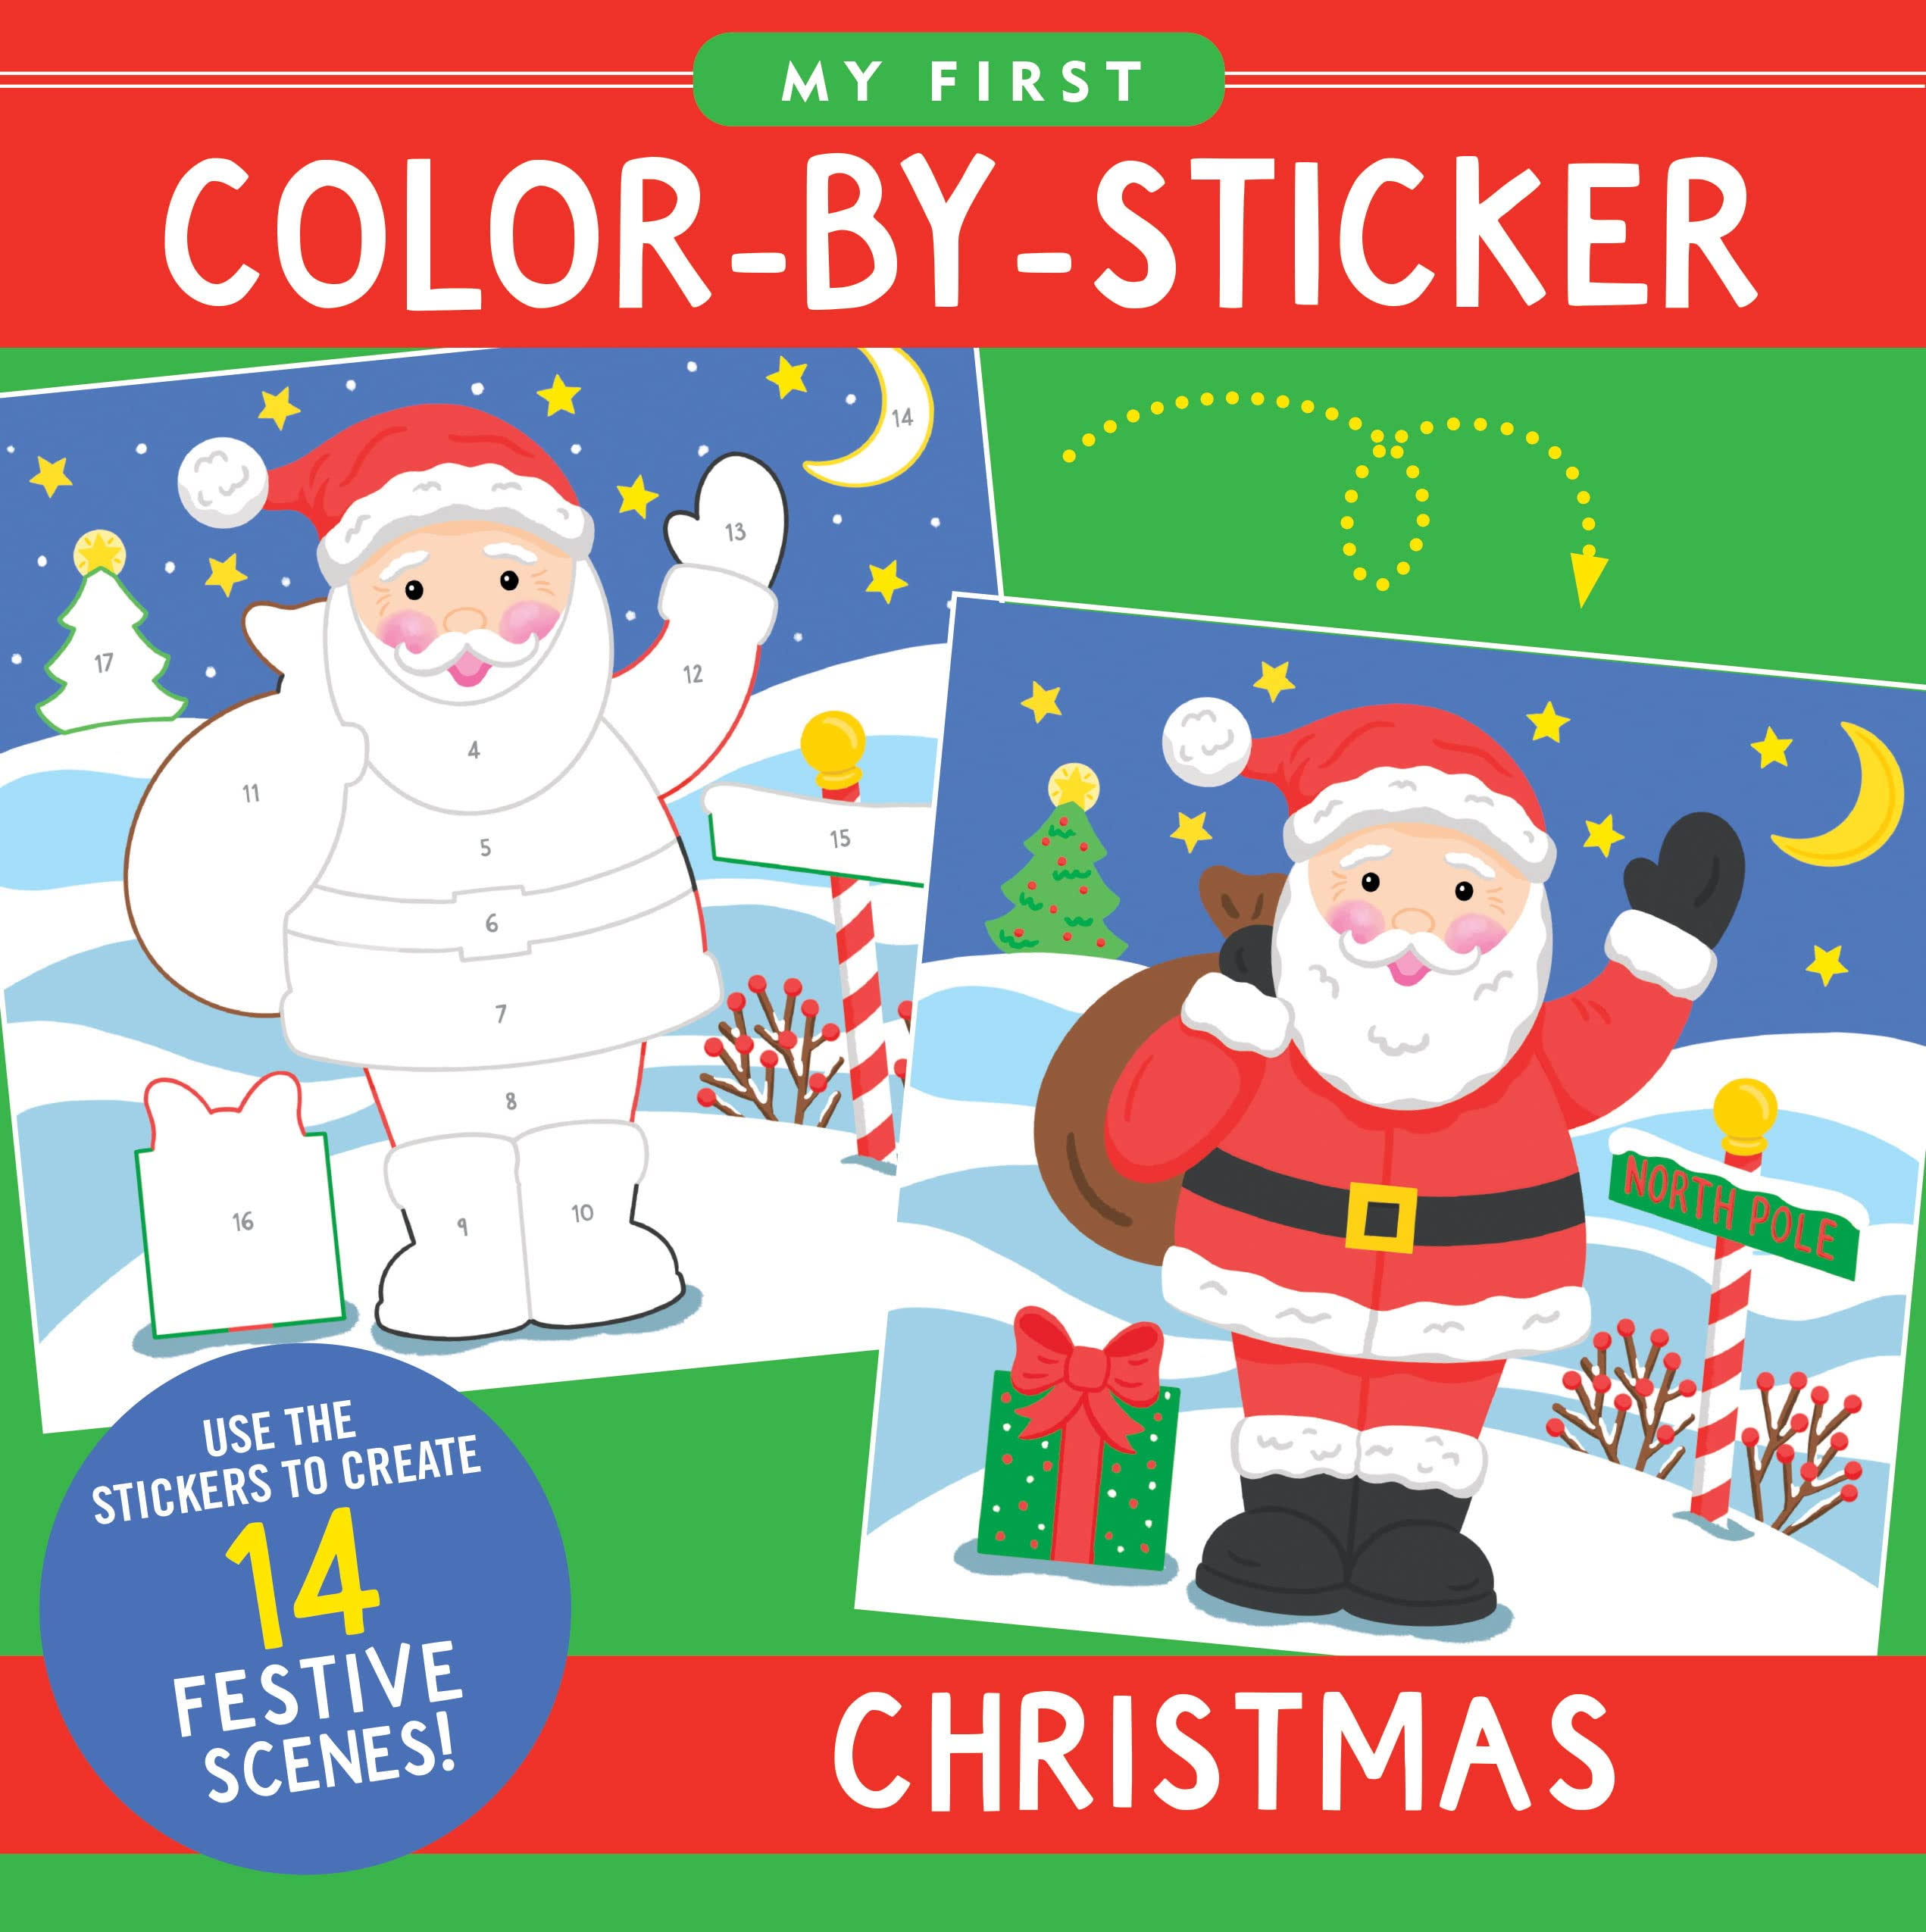 My First Color-by-Sticker Book - Christmas